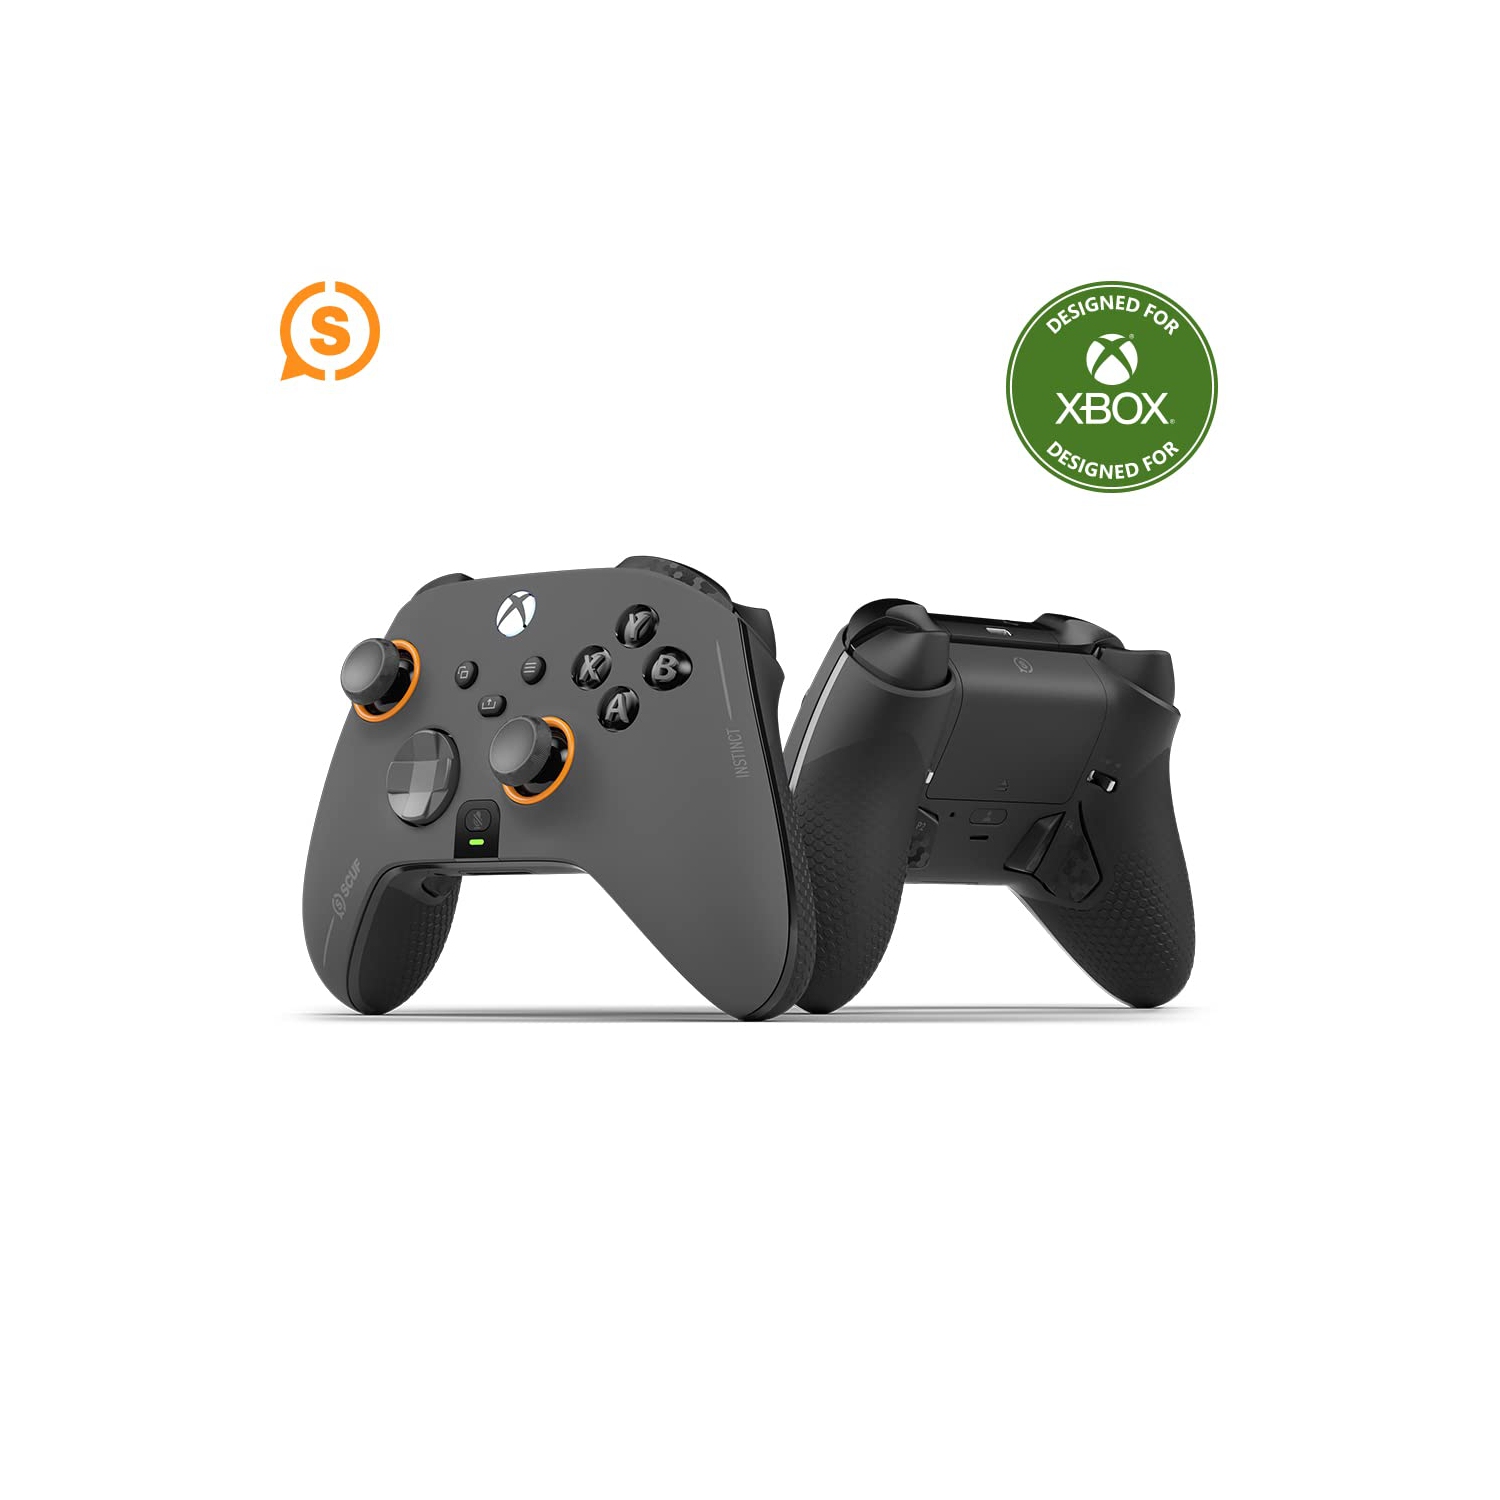 SCUF Instinct Pro Performance Series Wireless Xbox Controller - Remappable Back Paddles - Xbox Series X|S, Xbox One, PC and Mobile - Steel Gray +(refurbished -excellent)